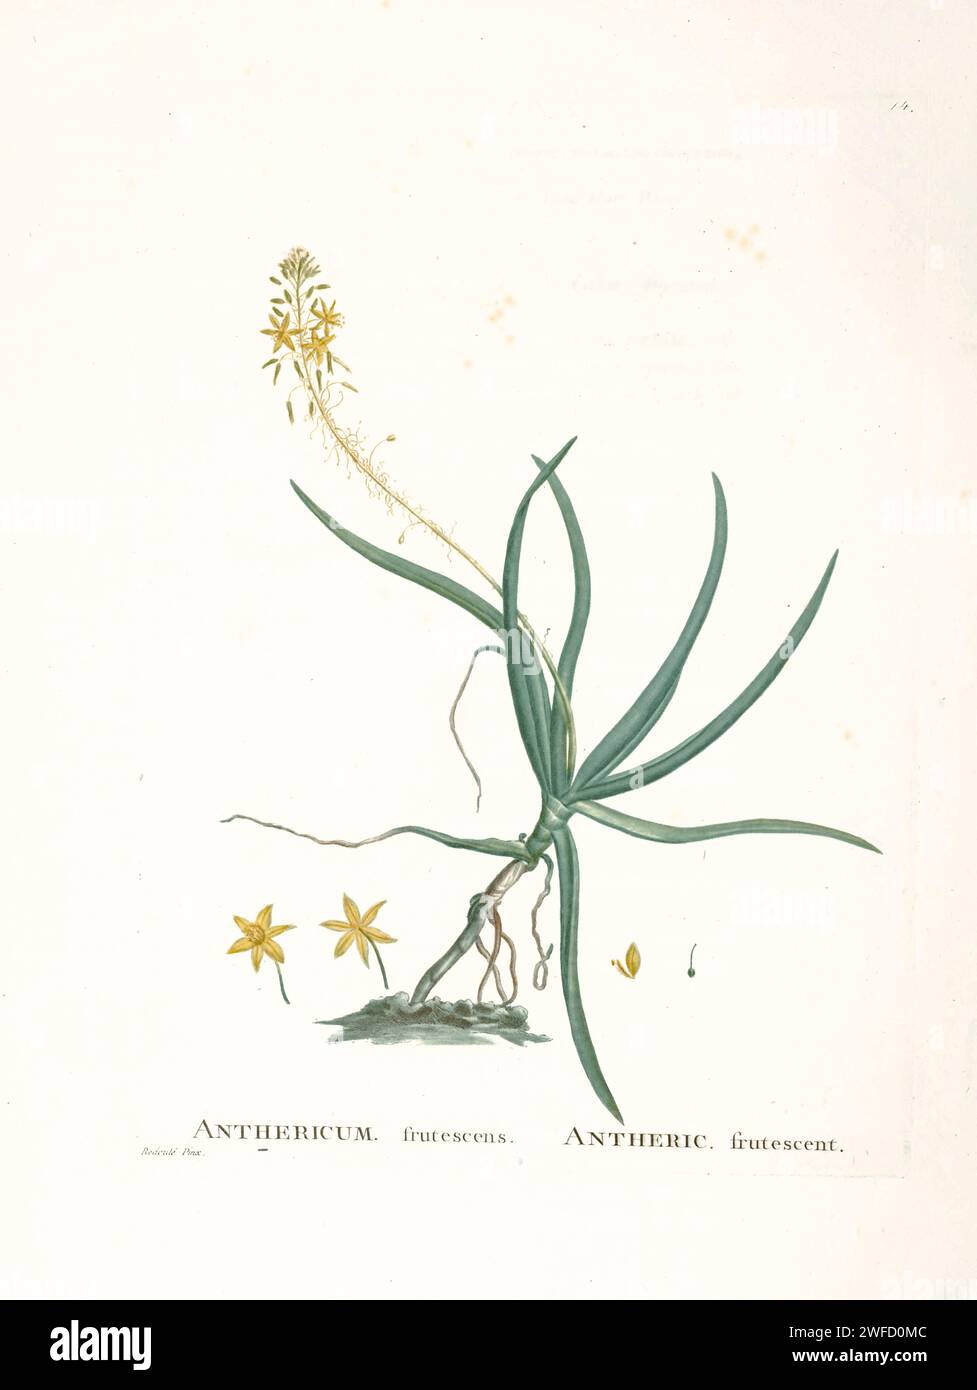 Bulbine caulescens L. Here As Anthericum frutescens (Bulbine caulescens) from History of Succulent Plants [Plantarum historia succulentarum / Histoire des plantes grasses] painted by Pierre-Joseph Redouté and described by Augustin Pyramus de Candolle Bulbine is a genus of plants in the family Asphodelaceae and subfamily Asphodeloideae, named for the bulb-shaped tuber of many species. Stock Photo